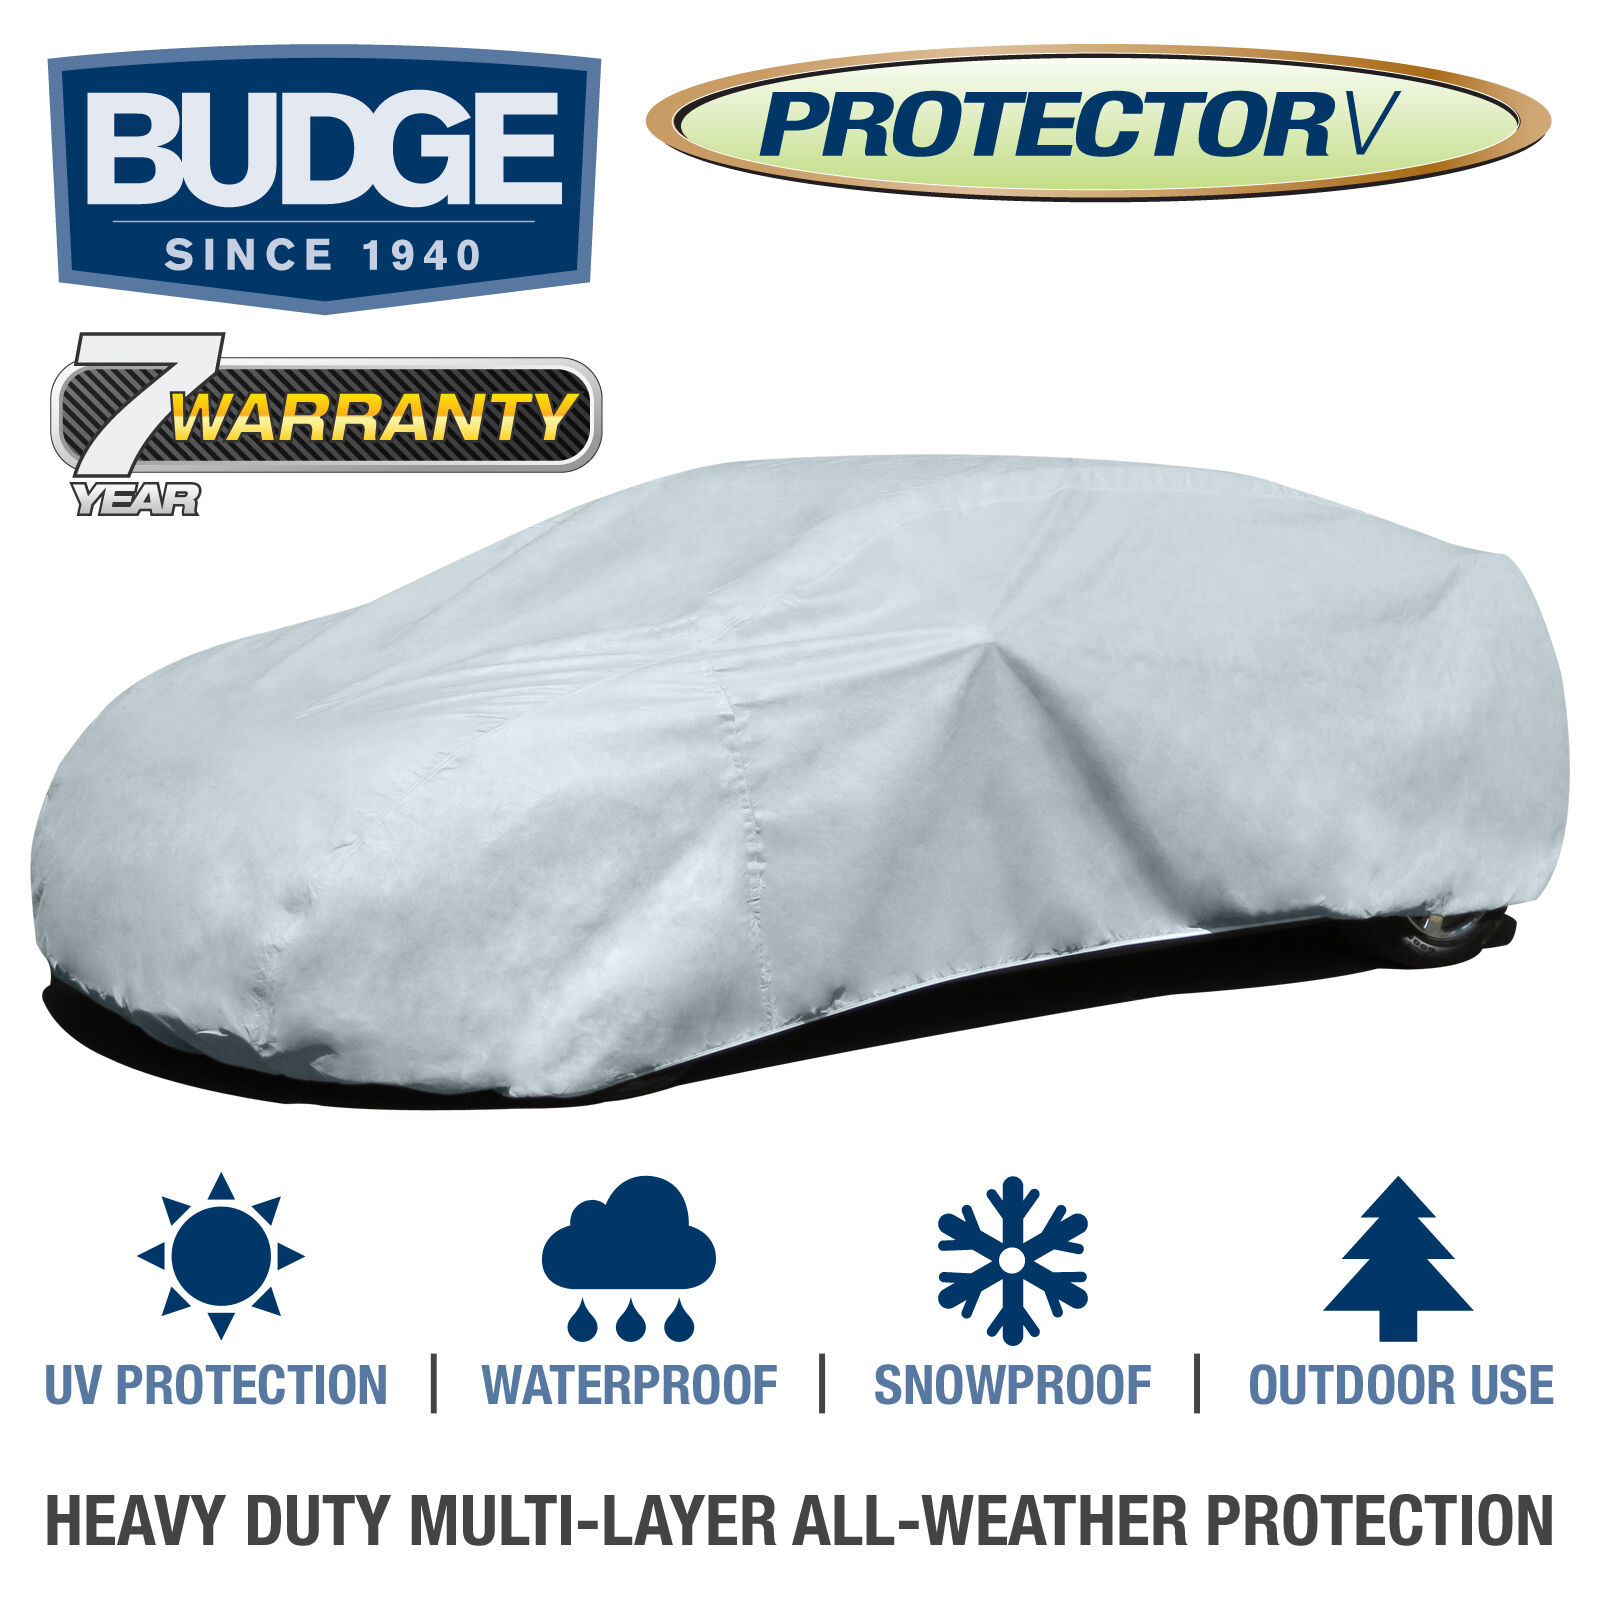 Budge Protector V Car Cover Fits Cadillac Fleetwood 1996| Waterproof |Breathable